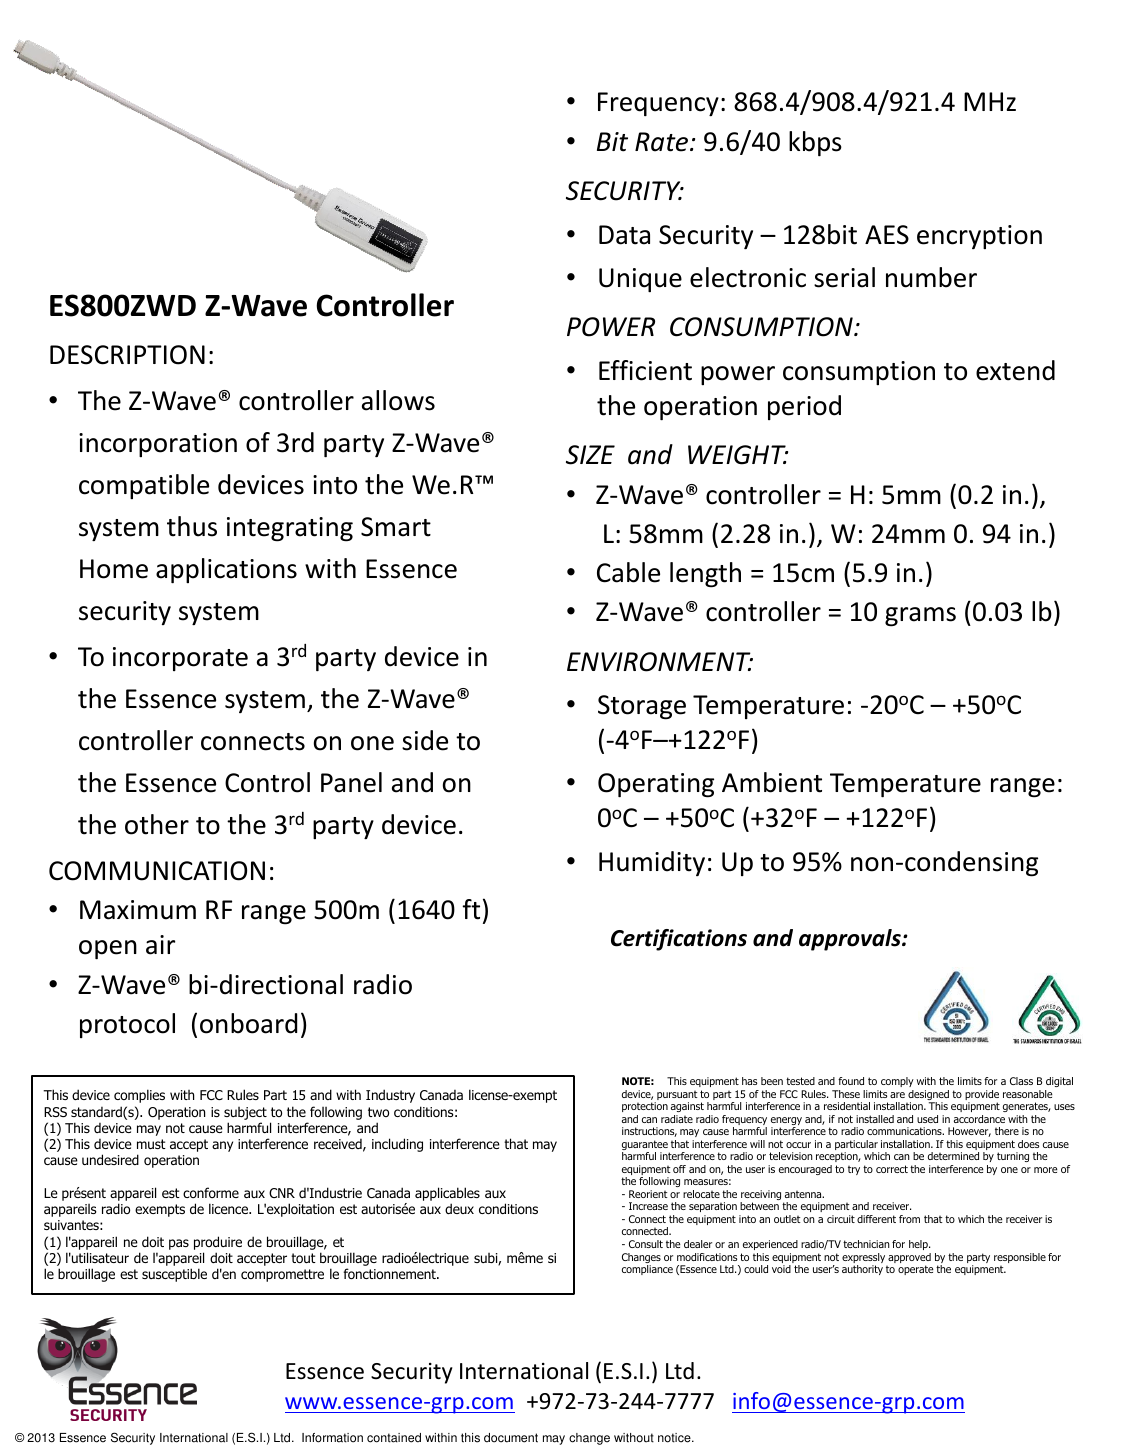    ES800ZWD Z-Wave Controller DESCRIPTION: •The Z-Wave® controller allows incorporation of 3rd party Z-Wave® compatible devices into the We.R™ system thus integrating Smart Home applications with Essence security system   •To incorporate a 3rd party device in the Essence system, the Z-Wave® controller connects on one side to the Essence Control Panel and on the other to the 3rd party device. COMMUNICATION: •Maximum RF range 500m (1640 ft) open air •Z-Wave® bi-directional radio   protocol  (onboard)   Essence Security International (E.S.I.) Ltd. www.essence-grp.com  +972-73-244-7777   info@essence-grp.com   © 2013 Essence Security International (E.S.I.) Ltd.  Information contained within this document may change without notice. Certifications and approvals: This device complies with FCC Rules Part 15 and with Industry Canada license-exempt RSS standard(s). Operation is subject to the following two conditions: (1) This device may not cause harmful interference, and (2) This device must accept any interference received, including interference that may cause undesired operation  Le présent appareil est conforme aux CNR d&apos;Industrie Canada applicables aux appareils radio exempts de licence. L&apos;exploitation est autorisée aux deux conditions suivantes: (1) l&apos;appareil ne doit pas produire de brouillage, et (2) l&apos;utilisateur de l&apos;appareil doit accepter tout brouillage radioélectrique subi, même si le brouillage est susceptible d&apos;en compromettre le fonctionnement. NOTE:    This equipment has been tested and found to comply with the limits for a Class B digital device, pursuant to part 15 of the FCC Rules. These limits are designed to provide reasonable protection against harmful interference in a residential installation. This equipment generates, uses and can radiate radio frequency energy and, if not installed and used in accordance with the instructions, may cause harmful interference to radio communications. However, there is no guarantee that interference will not occur in a particular installation. If this equipment does cause harmful interference to radio or television reception, which can be determined by turning the equipment off and on, the user is encouraged to try to correct the interference by one or more of the following measures:  - Reorient or relocate the receiving antenna. - Increase the separation between the equipment and receiver. - Connect the equipment into an outlet on a circuit different from that to which the receiver is connected. - Consult the dealer or an experienced radio/TV technician for help. Changes or modifications to this equipment not expressly approved by the party responsible for compliance (Essence Ltd.) could void the user’s authority to operate the equipment. •Frequency: 868.4/908.4/921.4 MHz •Bit Rate: 9.6/40 kbps SECURITY: •Data Security – 128bit AES encryption •Unique electronic serial number POWER  CONSUMPTION: •Efficient power consumption to extend the operation period SIZE  and  WEIGHT:  •Z-Wave® controller = H: 5mm (0.2 in.),    L: 58mm (2.28 in.), W: 24mm 0. 94 in.) •Cable length = 15cm (5.9 in.) •Z-Wave® controller = 10 grams (0.03 lb) ENVIRONMENT: •Storage Temperature: -20oC – +50oC                          (-4oF–+122oF) •Operating Ambient Temperature range:                    0oC – +50oC (+32oF – +122oF) •Humidity: Up to 95% non-condensing 